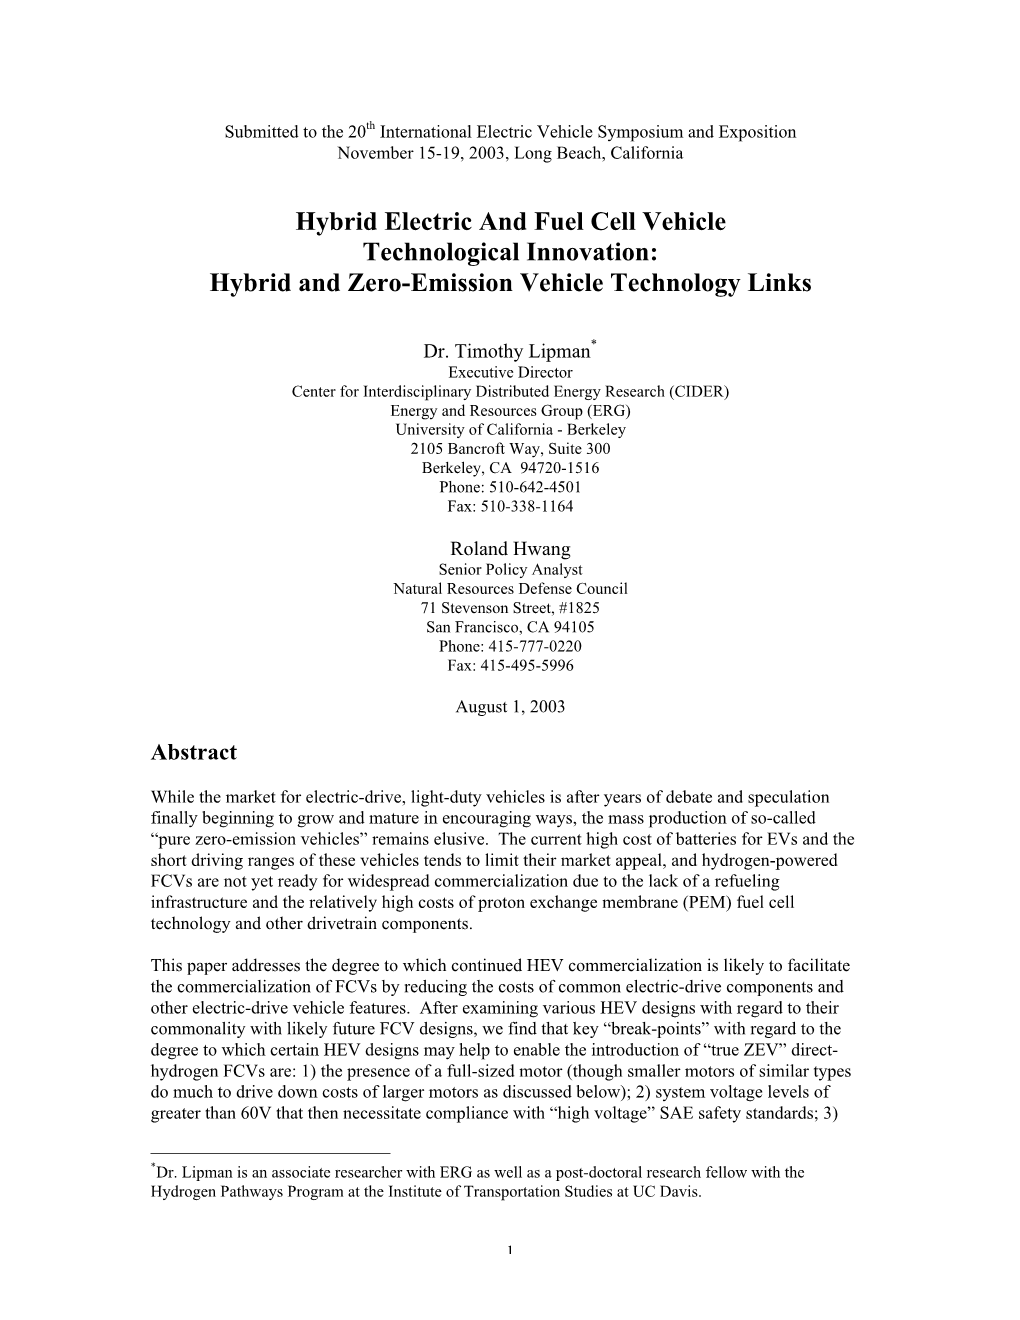 Hybrid Electric and Fuel Cell Vehicle Technological Innovation: Hybrid and Zero-Emission Vehicle Technology Links